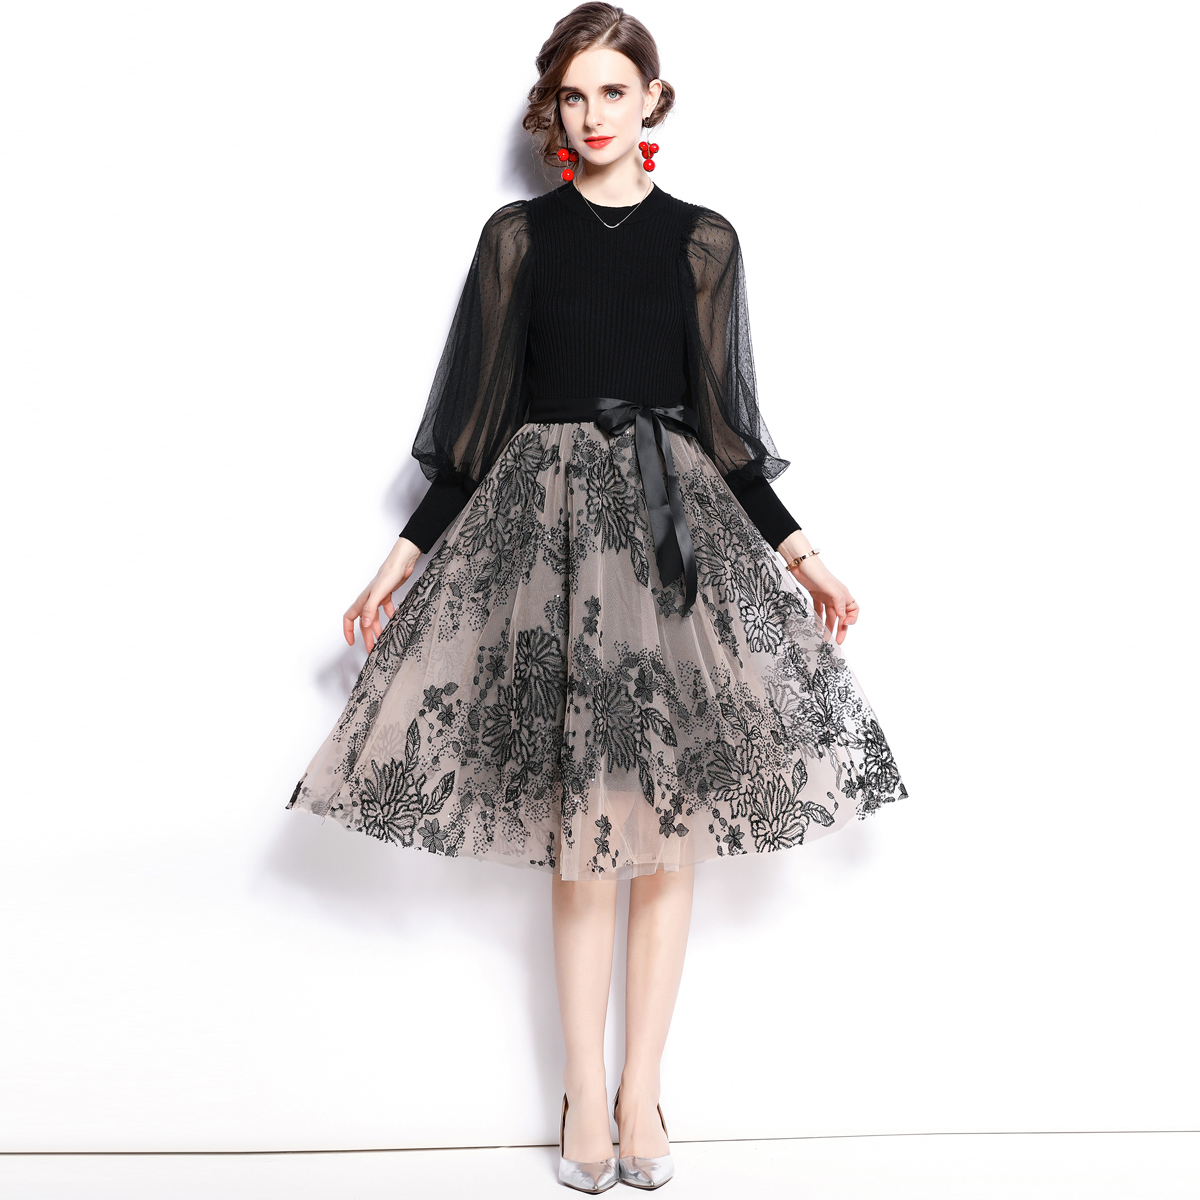 Knitted gauze floral autumn long sleeve fashion dress for women